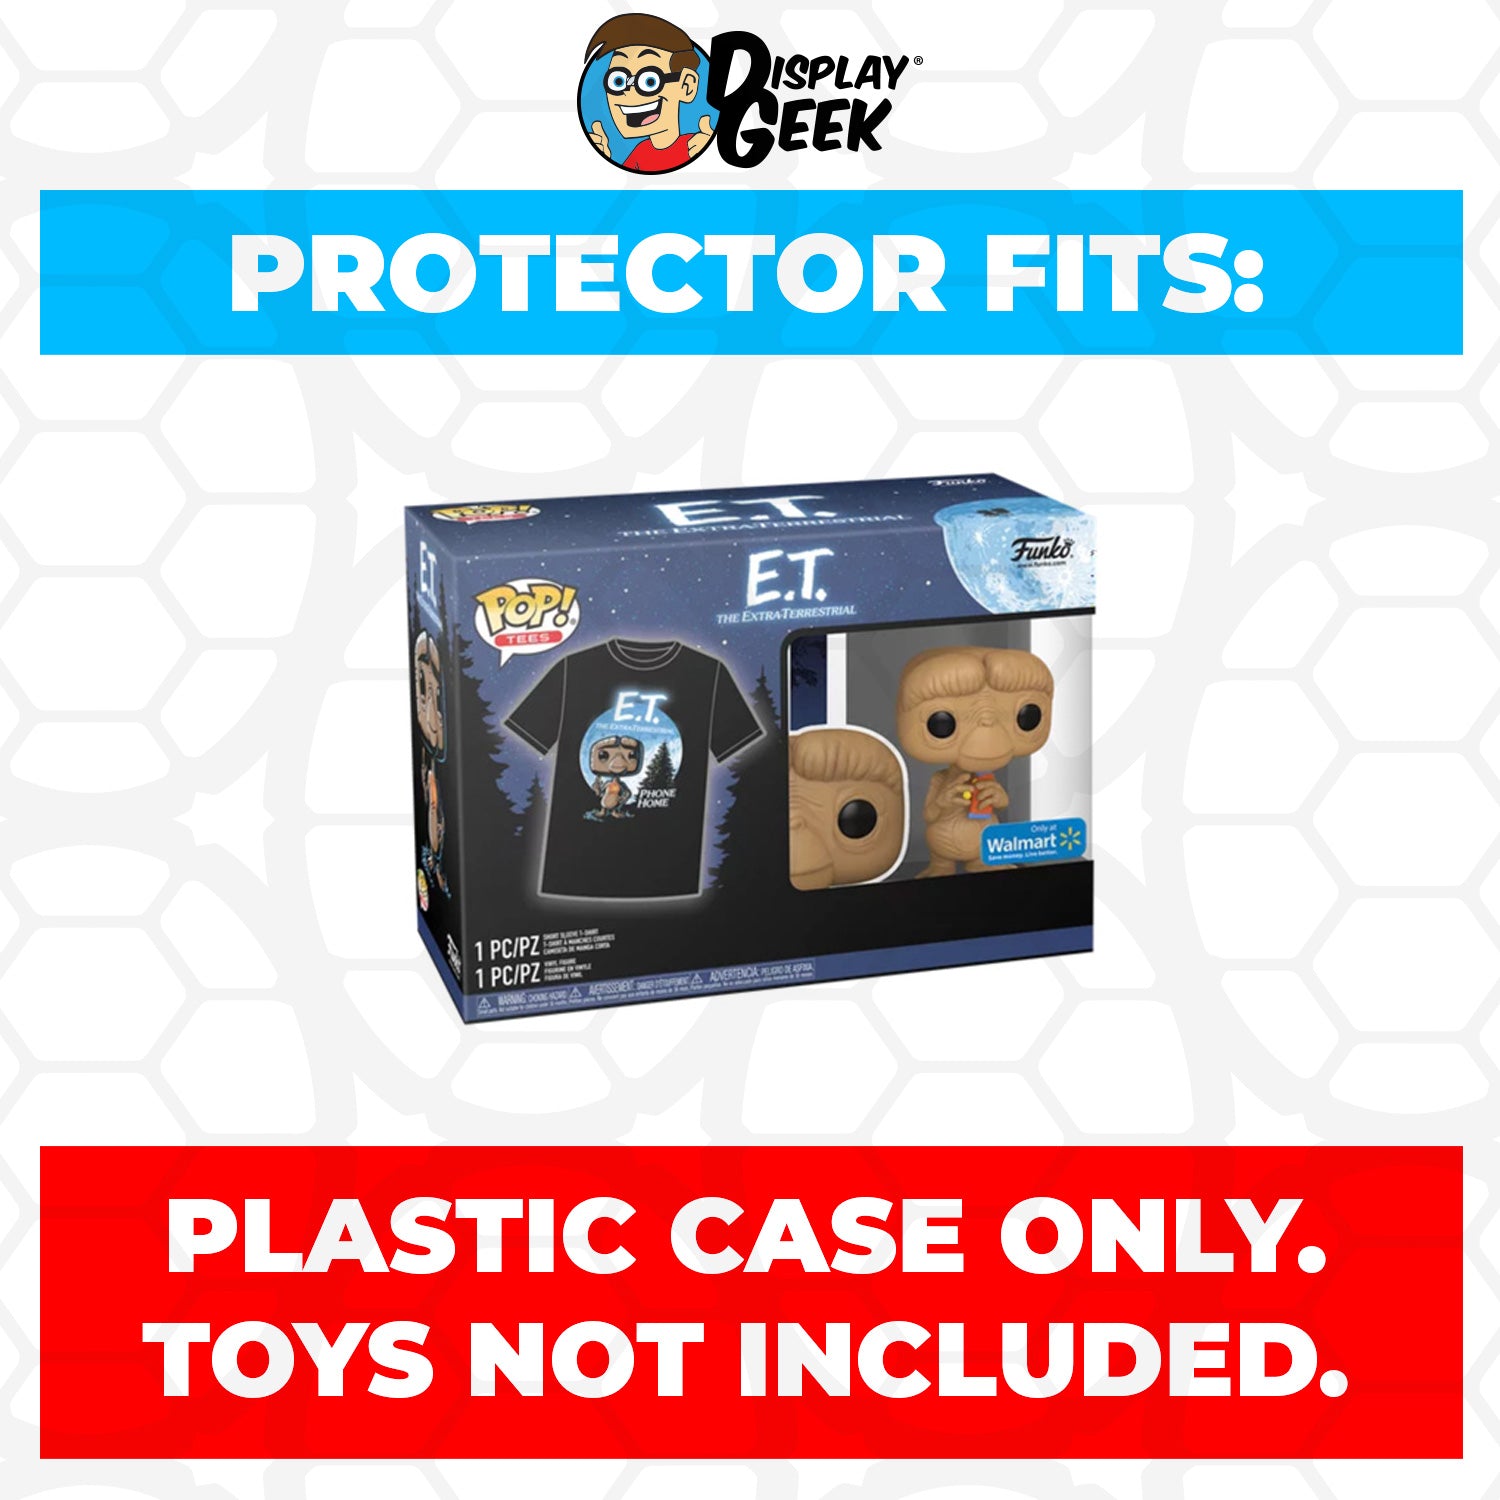 Pop Protector for Pop & Tee E.T. with Candy #1266 Funko Box - PPG Pop Protector Guide Search Created by Display Geek